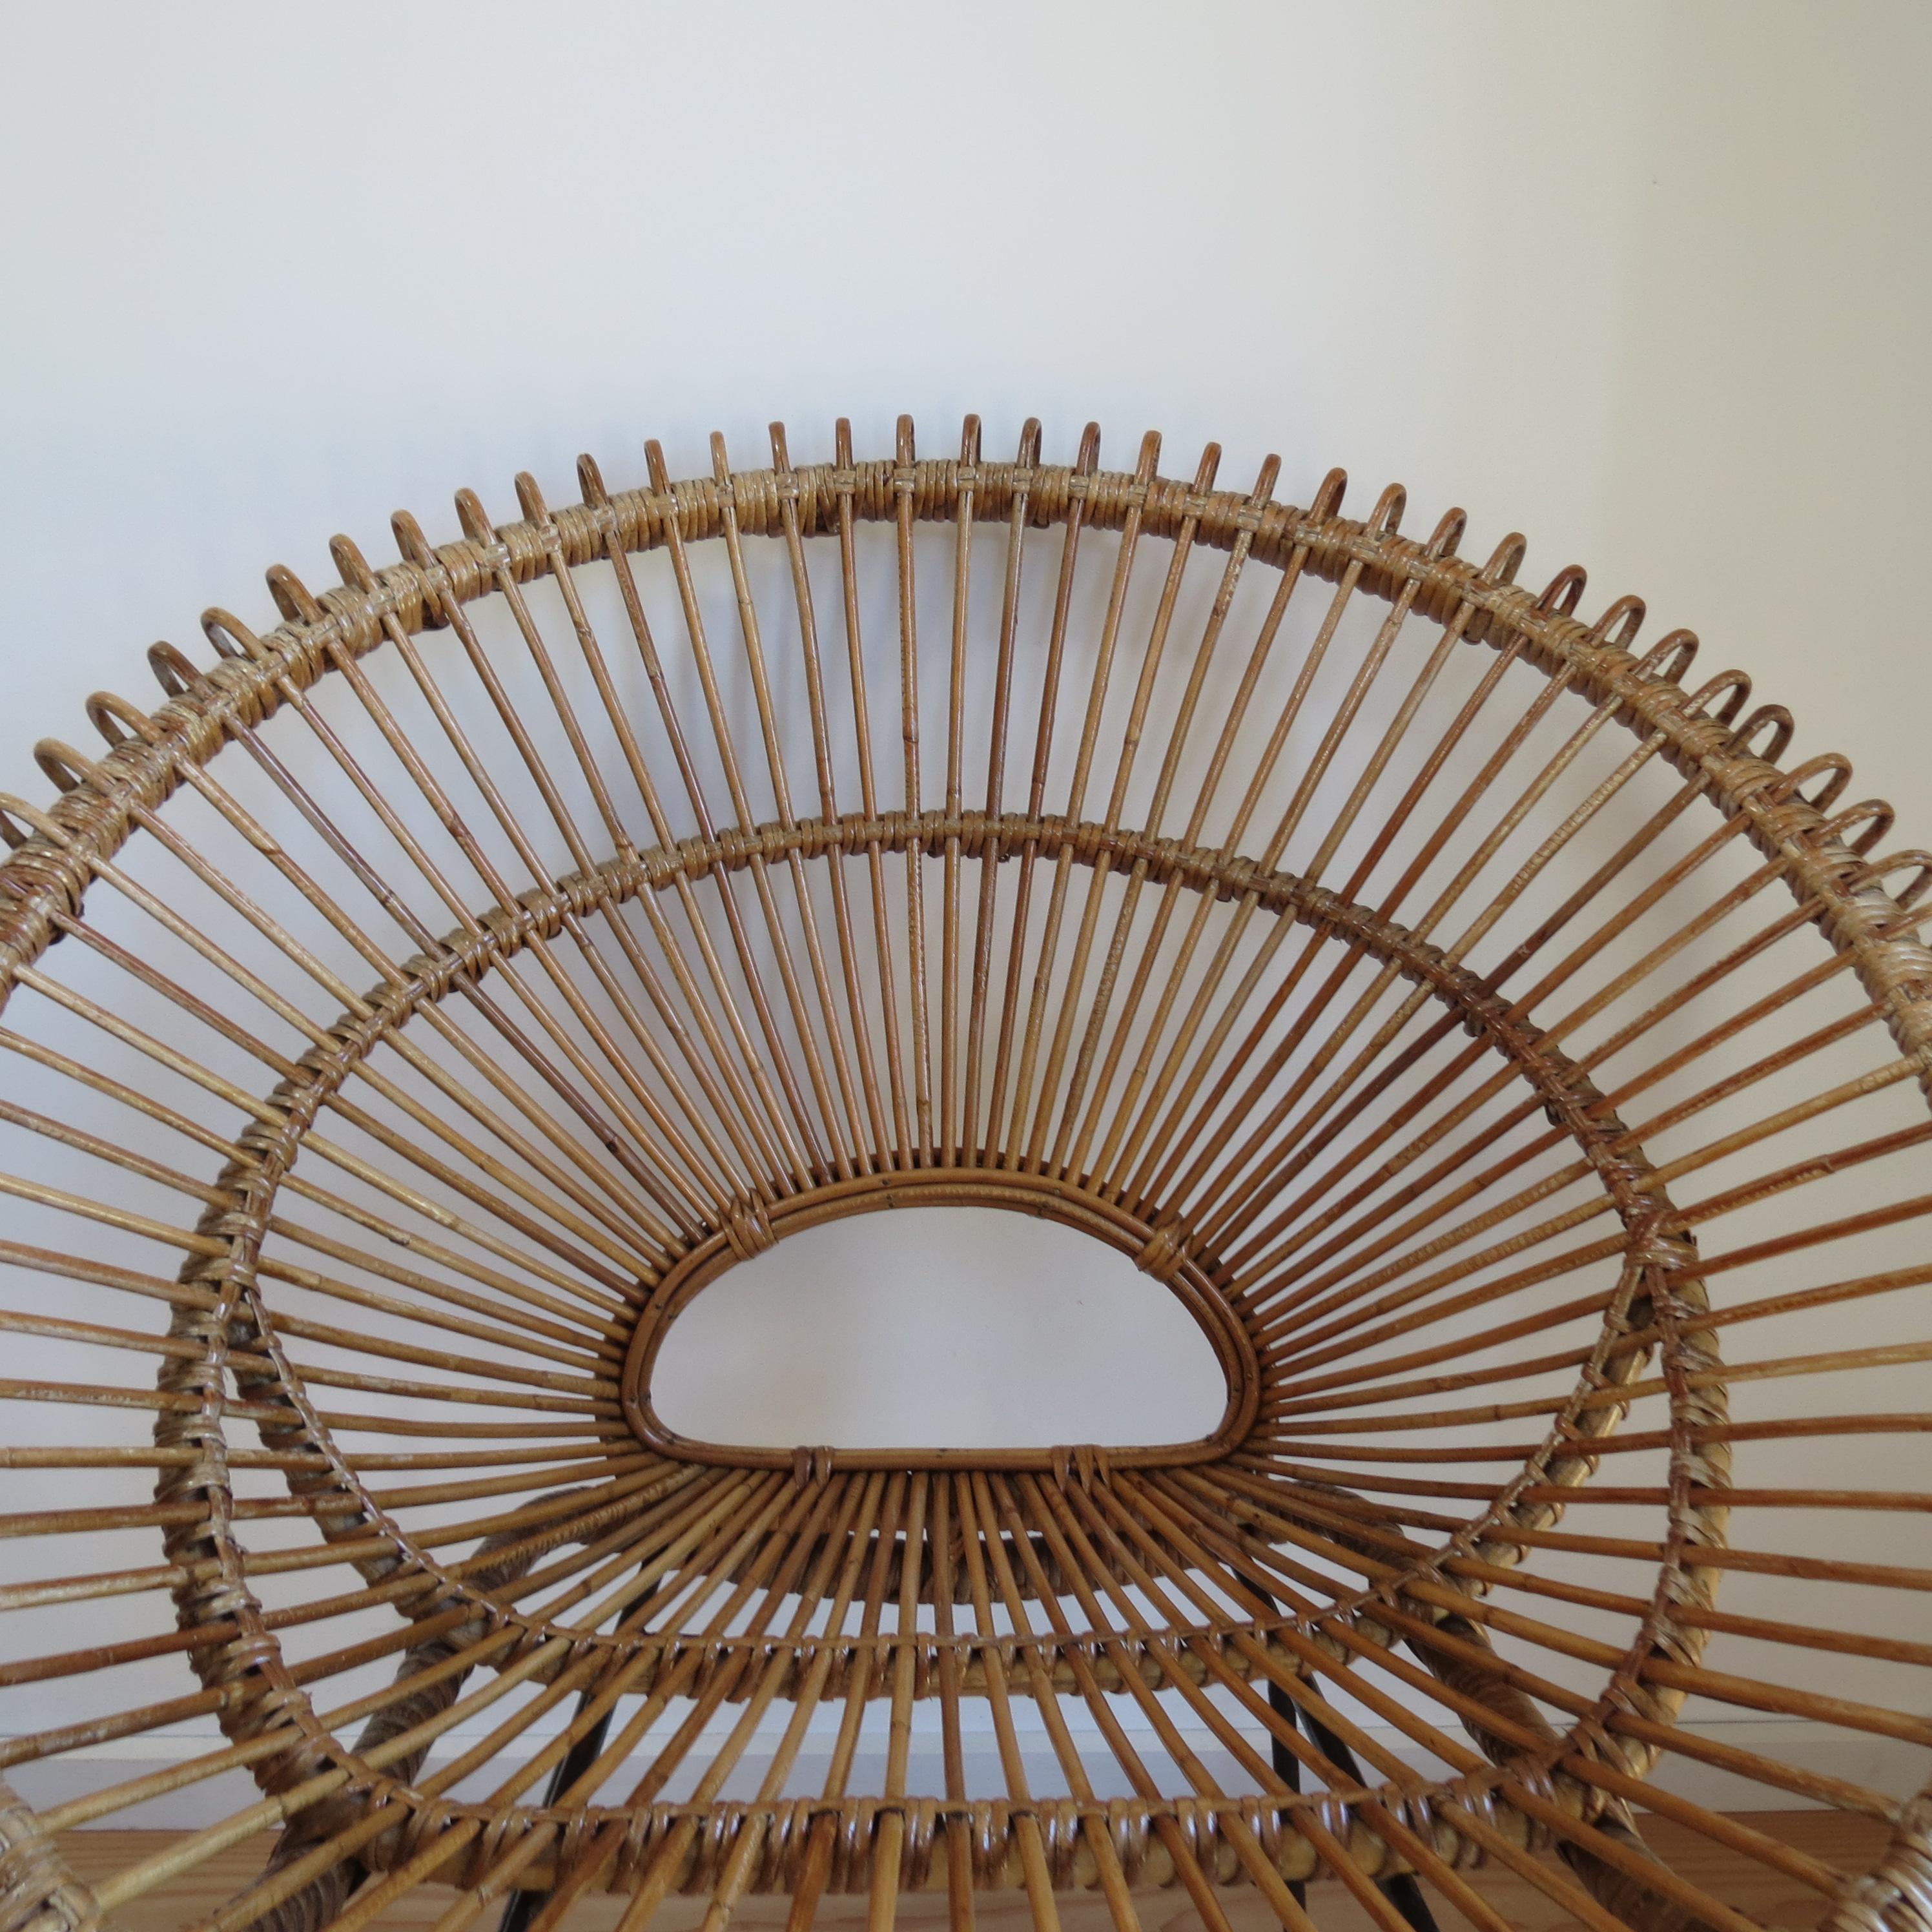 Machine-Made 1950s Rattan Cane and Metal Chair Franco Albini 2 available B